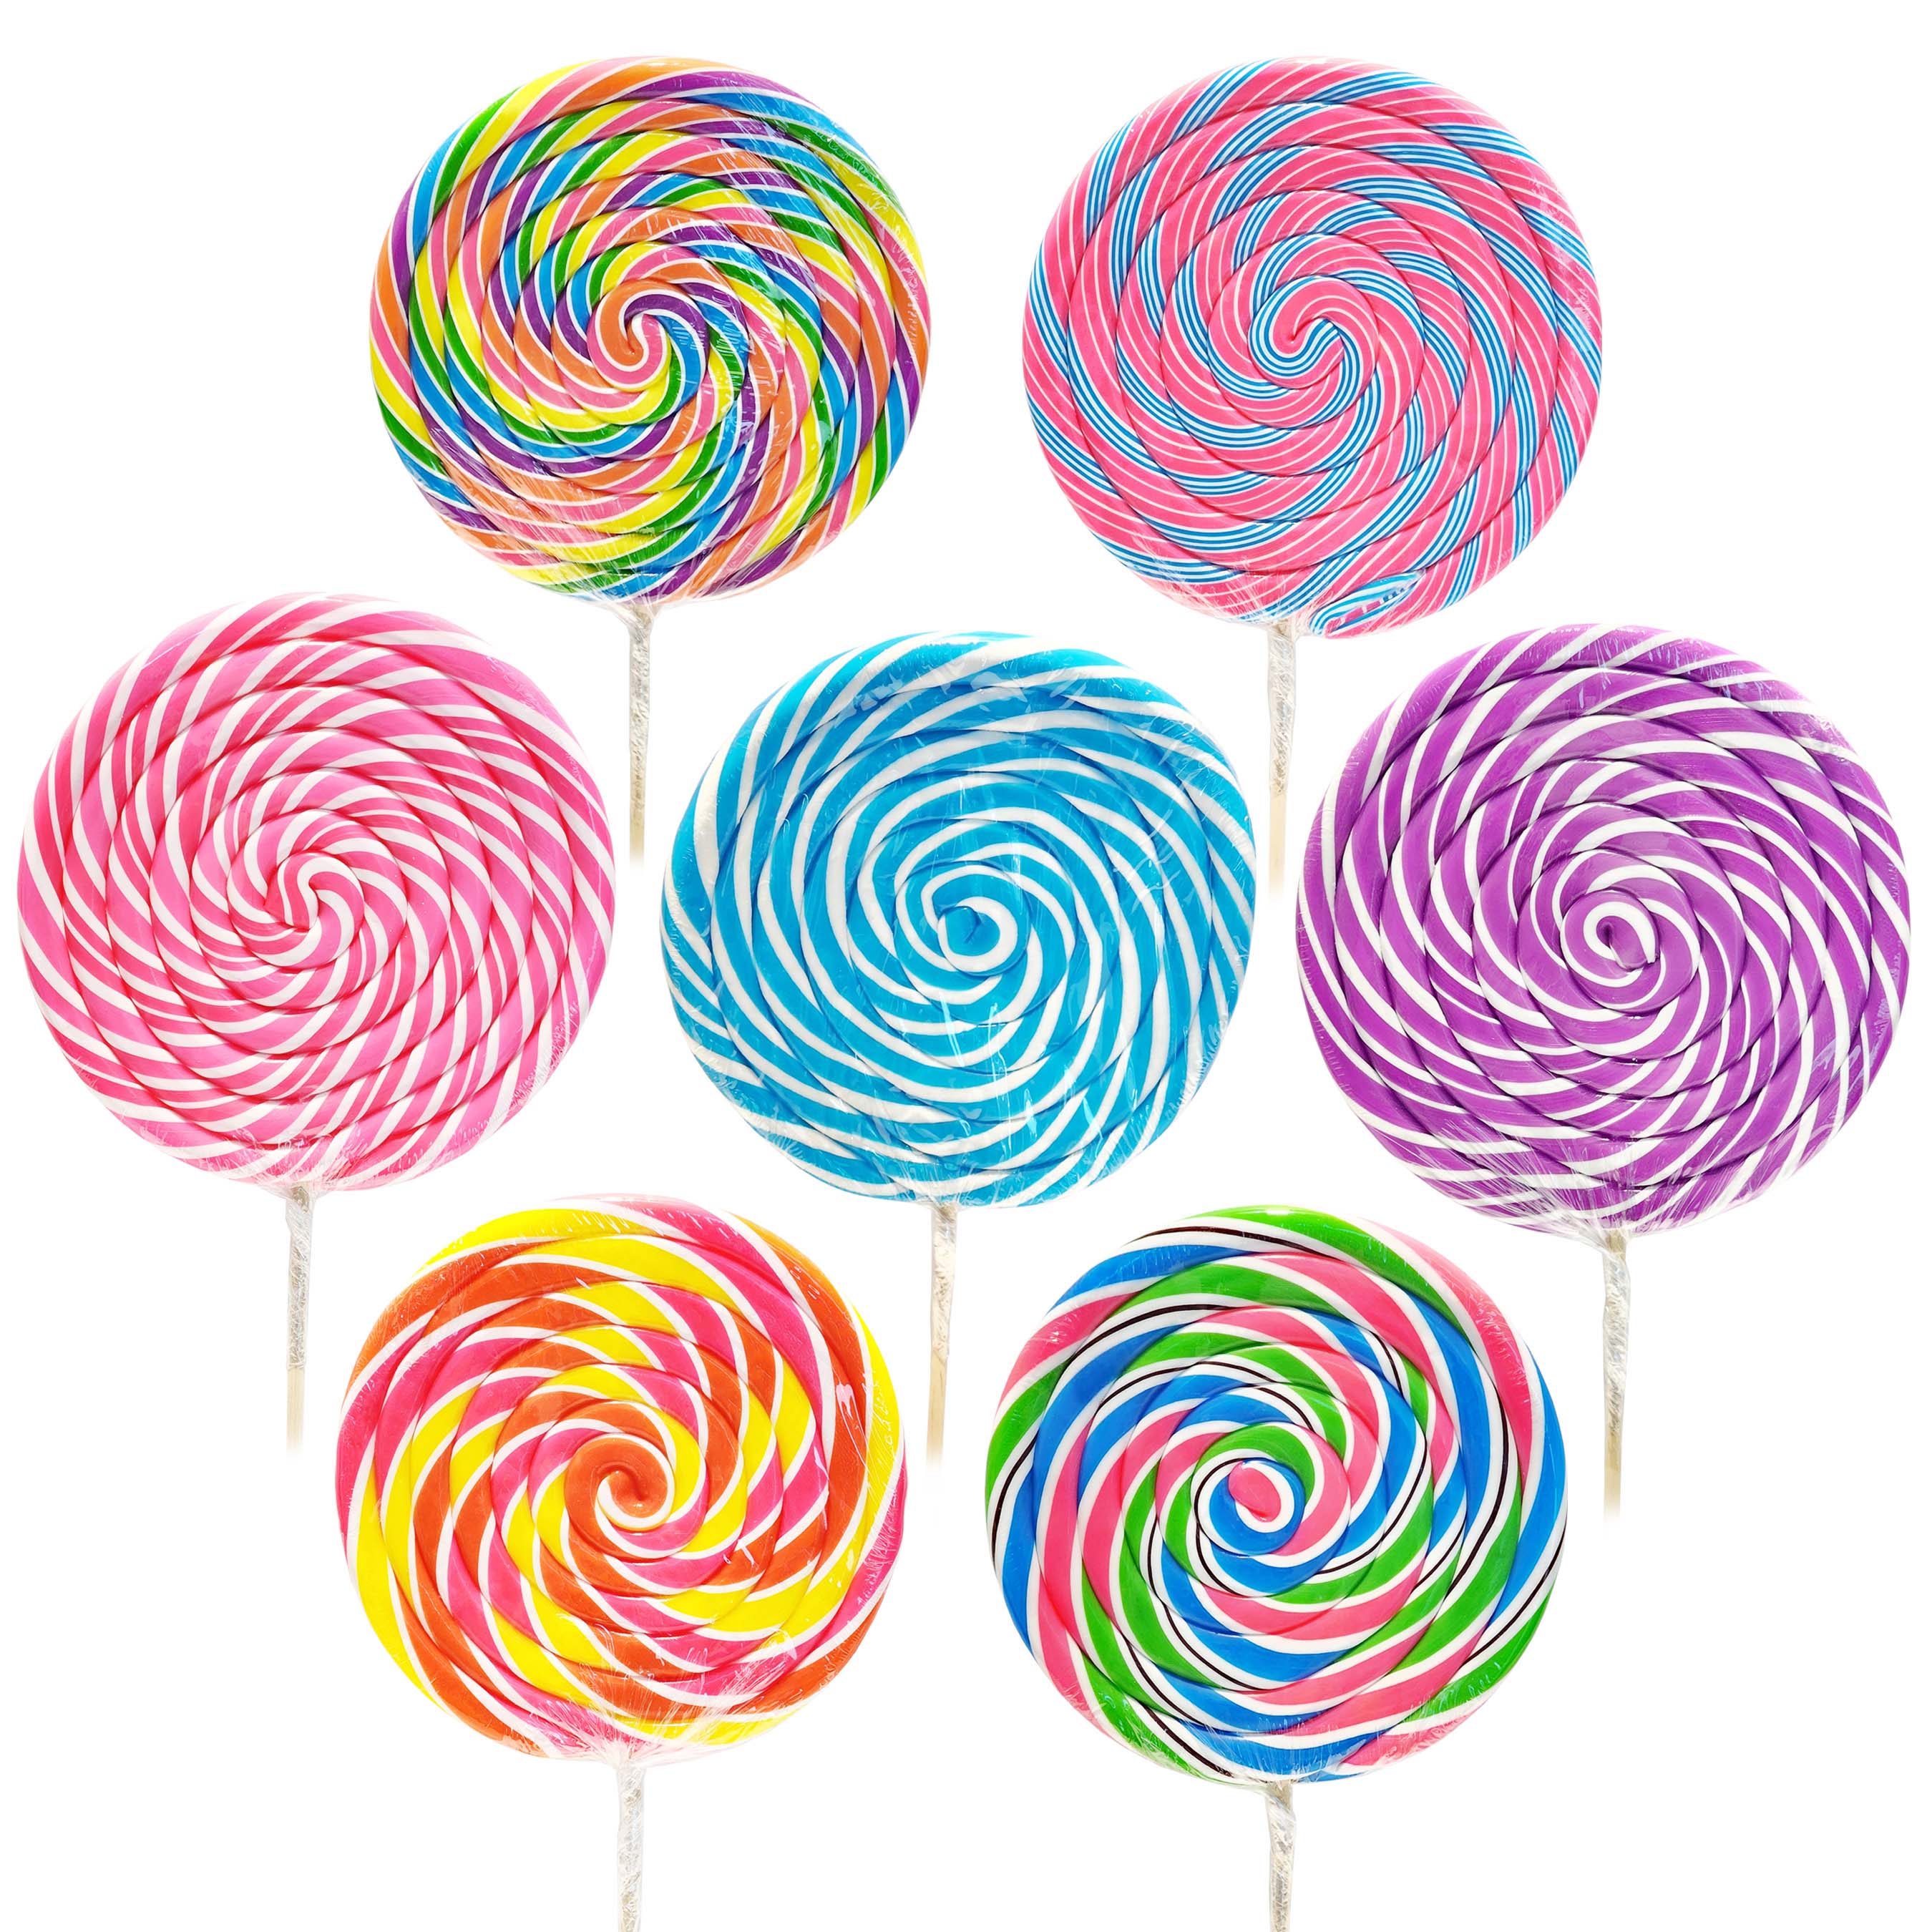 extra-large swhirl lollipops, 360 grams per piece.